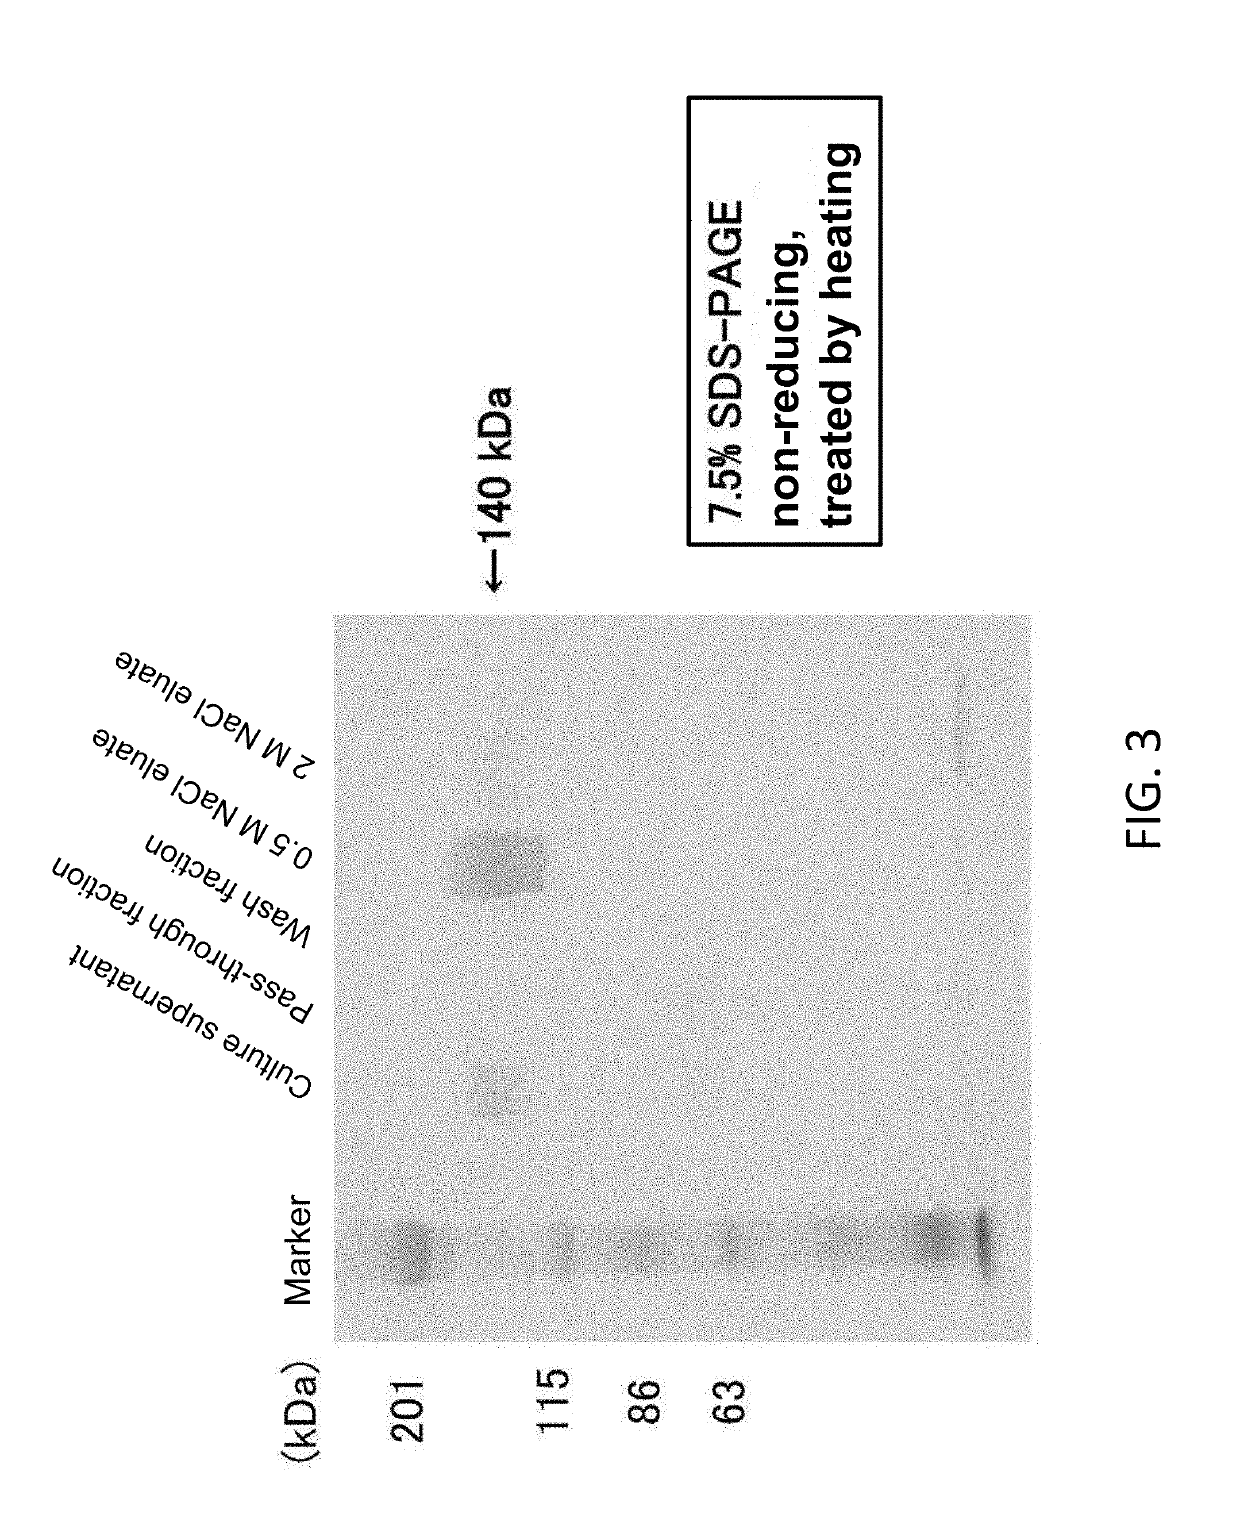 Lactoferrin/albumin fusion protein and production method therefor